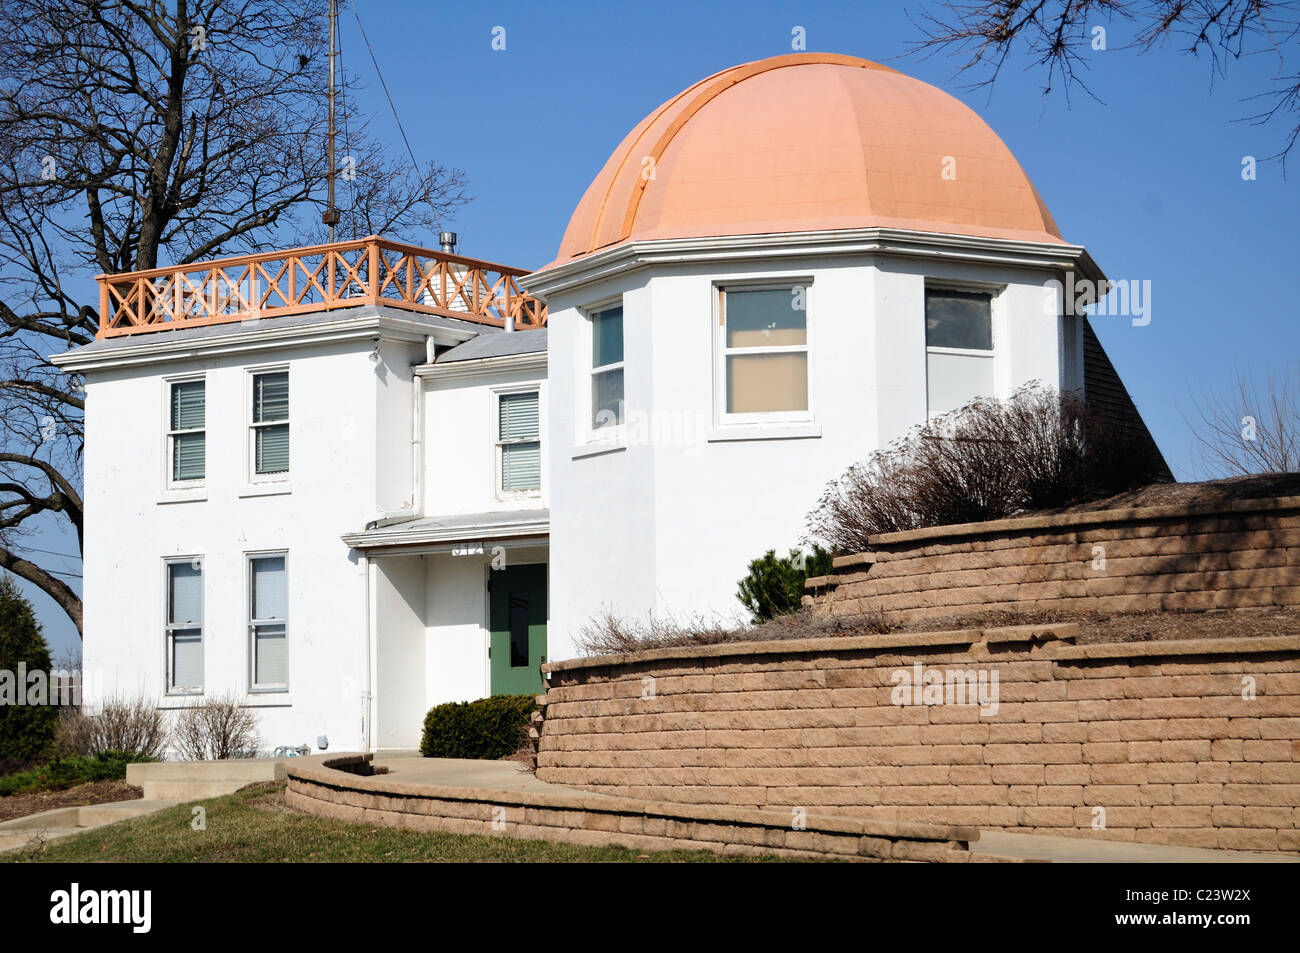 The Elgin National Watch Company Observatory, built in 1910. Elgin, Illinois, USA. Stock Photo